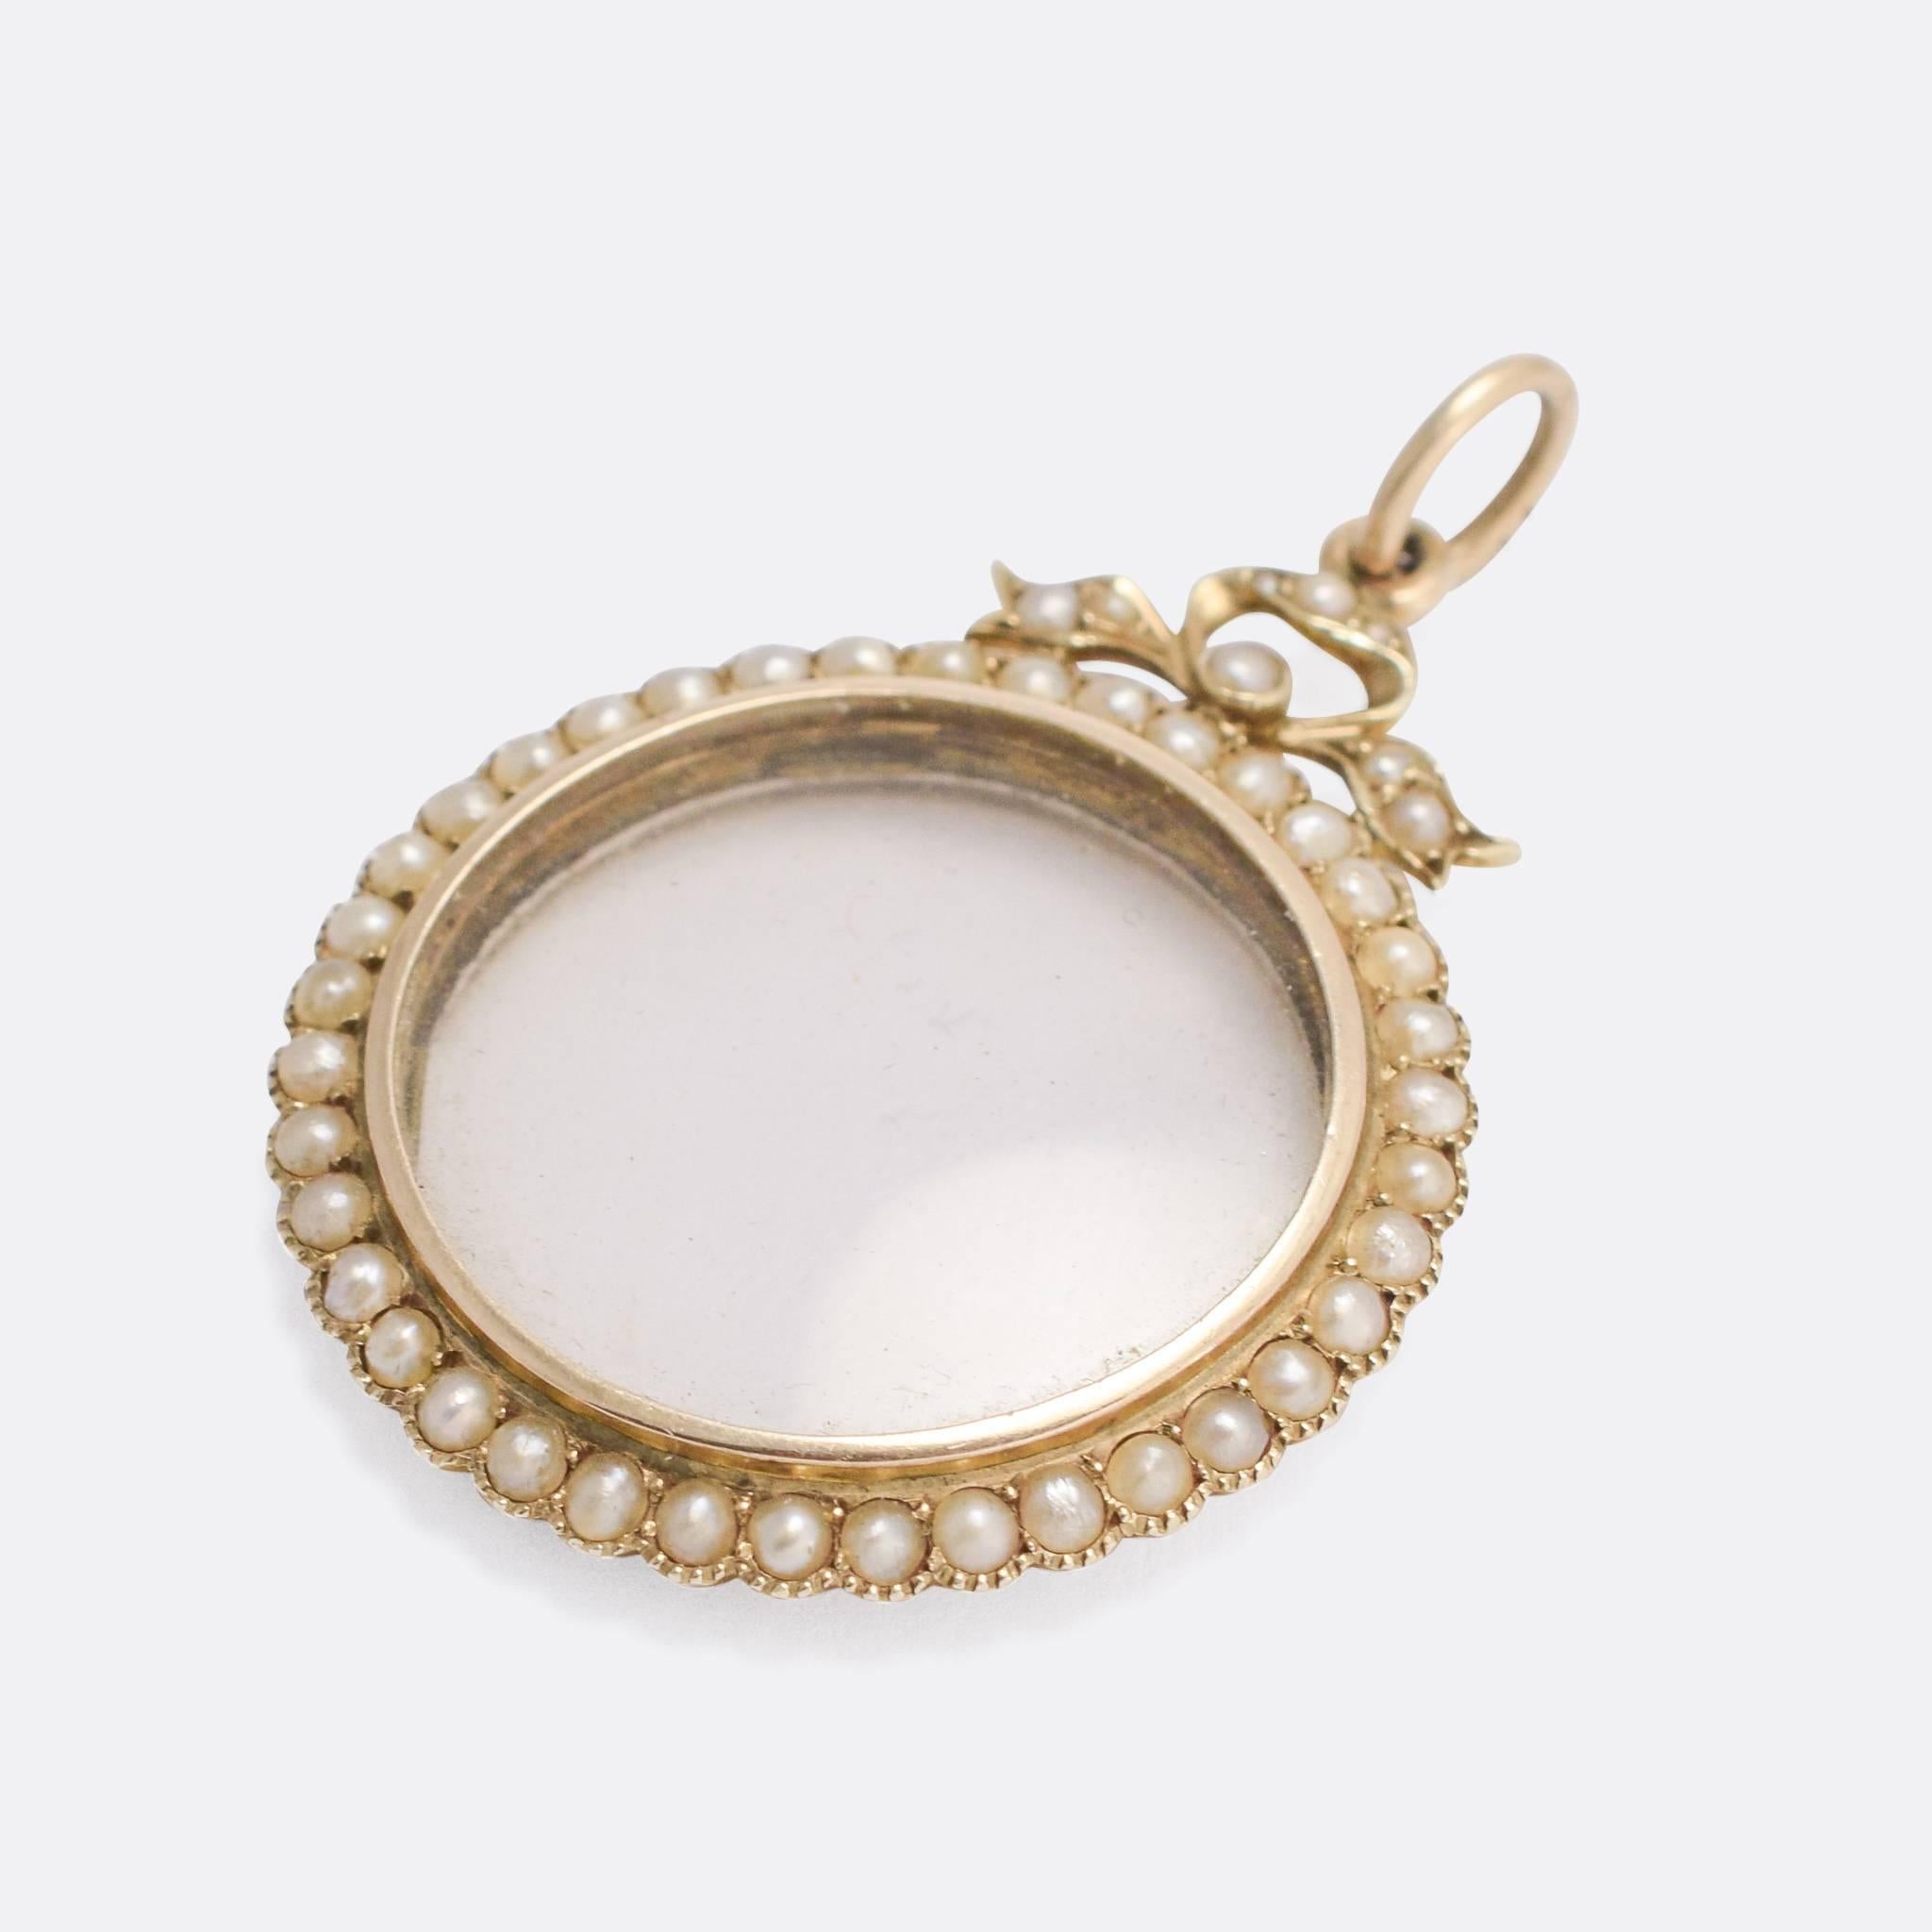 An elegant antique round locket, set with pearls and finished with a bow on top. It's modelled in 9k gold throughout, with a glass front and back locket compartment. The locket is easily accessible from the reverse, allowing for a photograph or